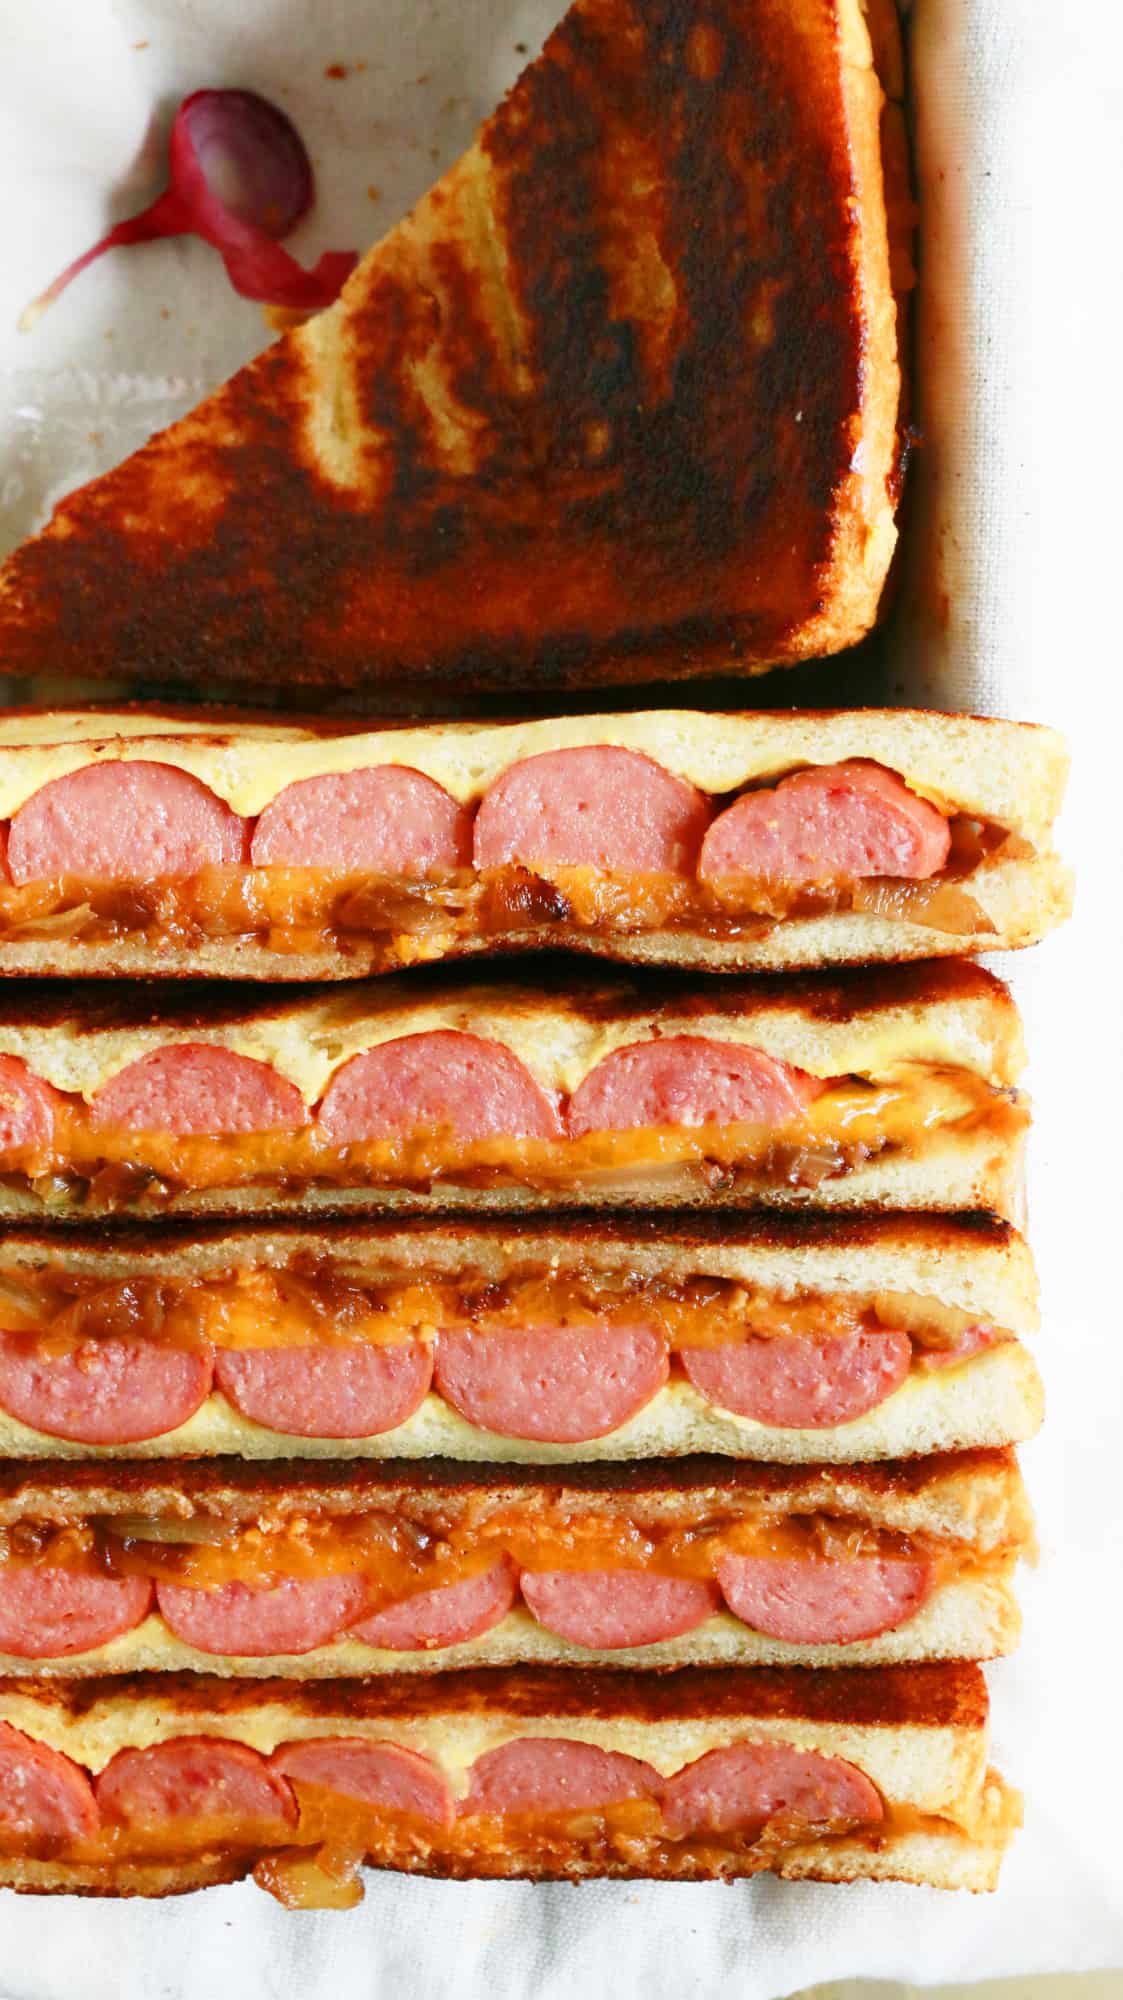 grilled cheese sandwiches with hot dogs, caramelized onions and barbecue sauce